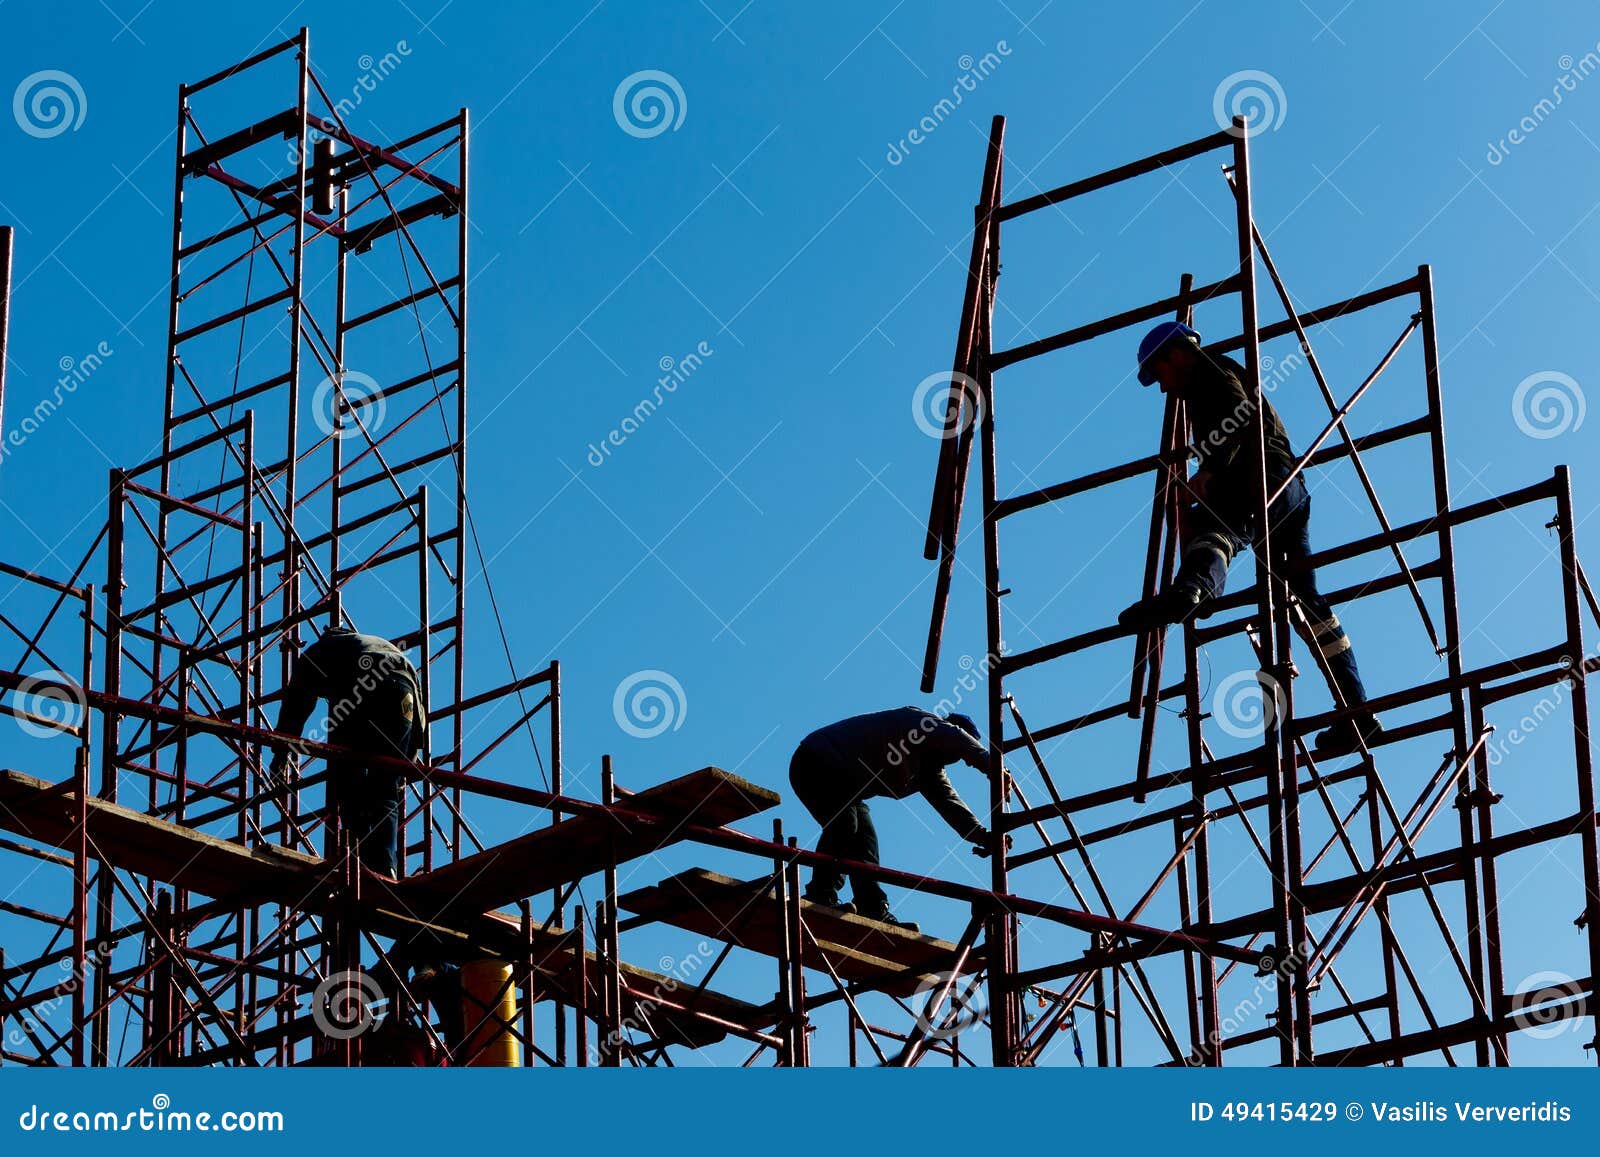 silhouette of construction workers against sky on scaffolding wi